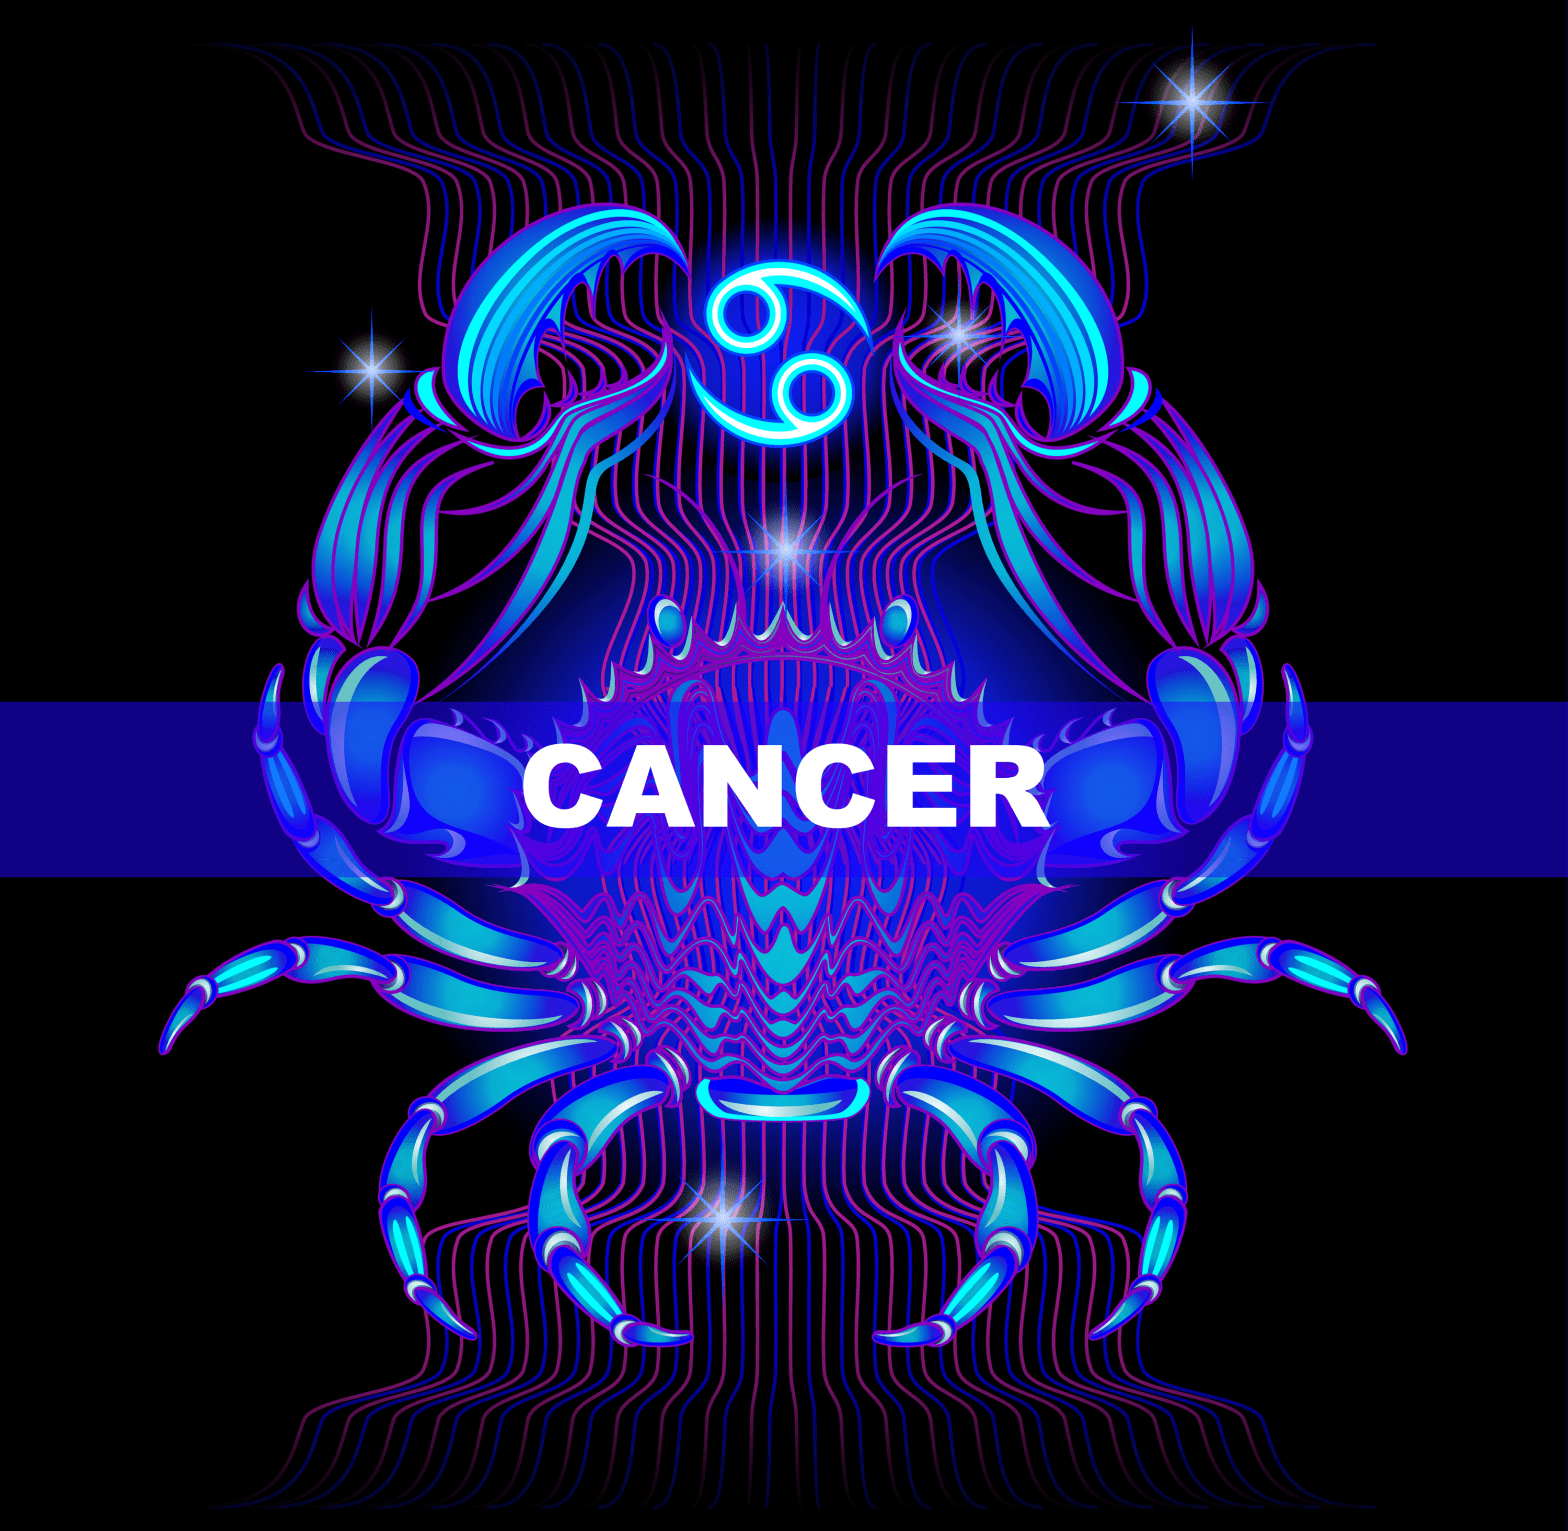 Astrological-Horoscope-for-Cancer,-2020-21:-Mid-Year-Review-&-Next-12 months